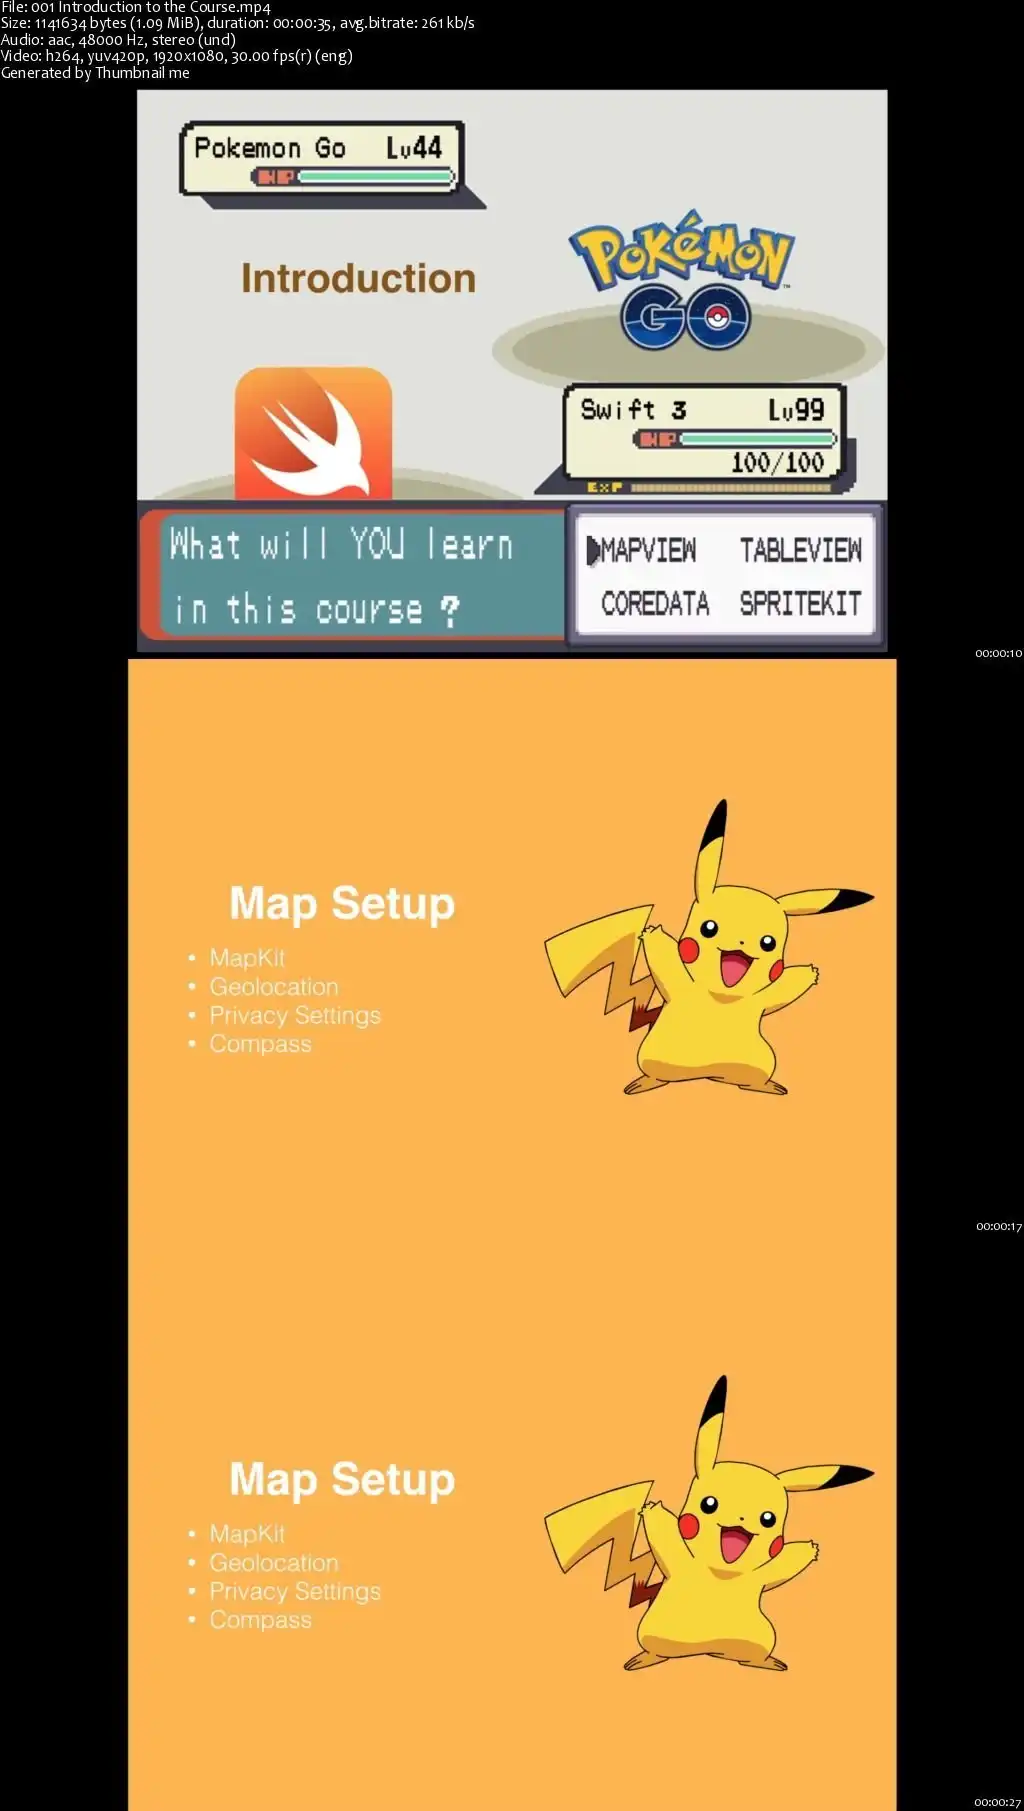 Download Make Your Own Pokemon Go Game For iOS 10 (2016 ...